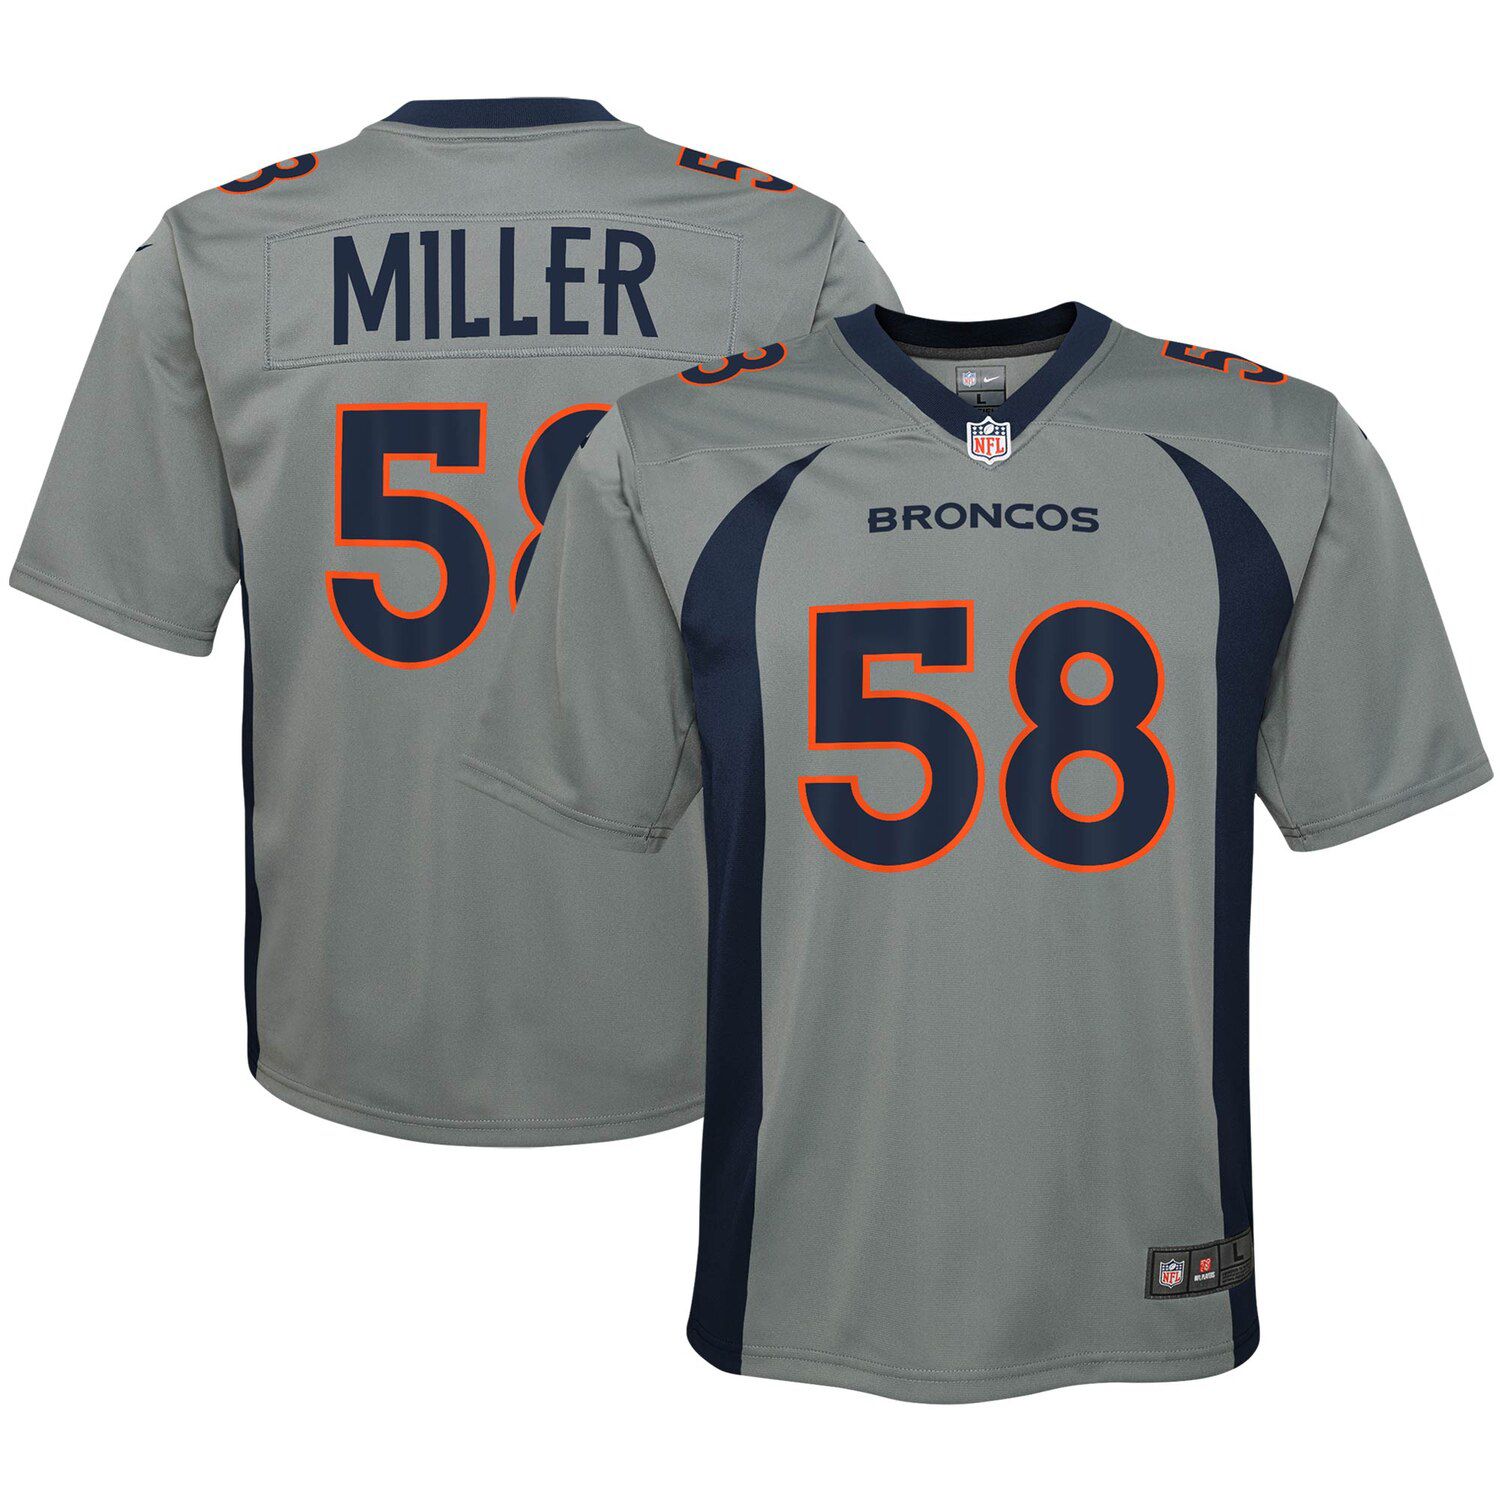 bronco jerseys for youth